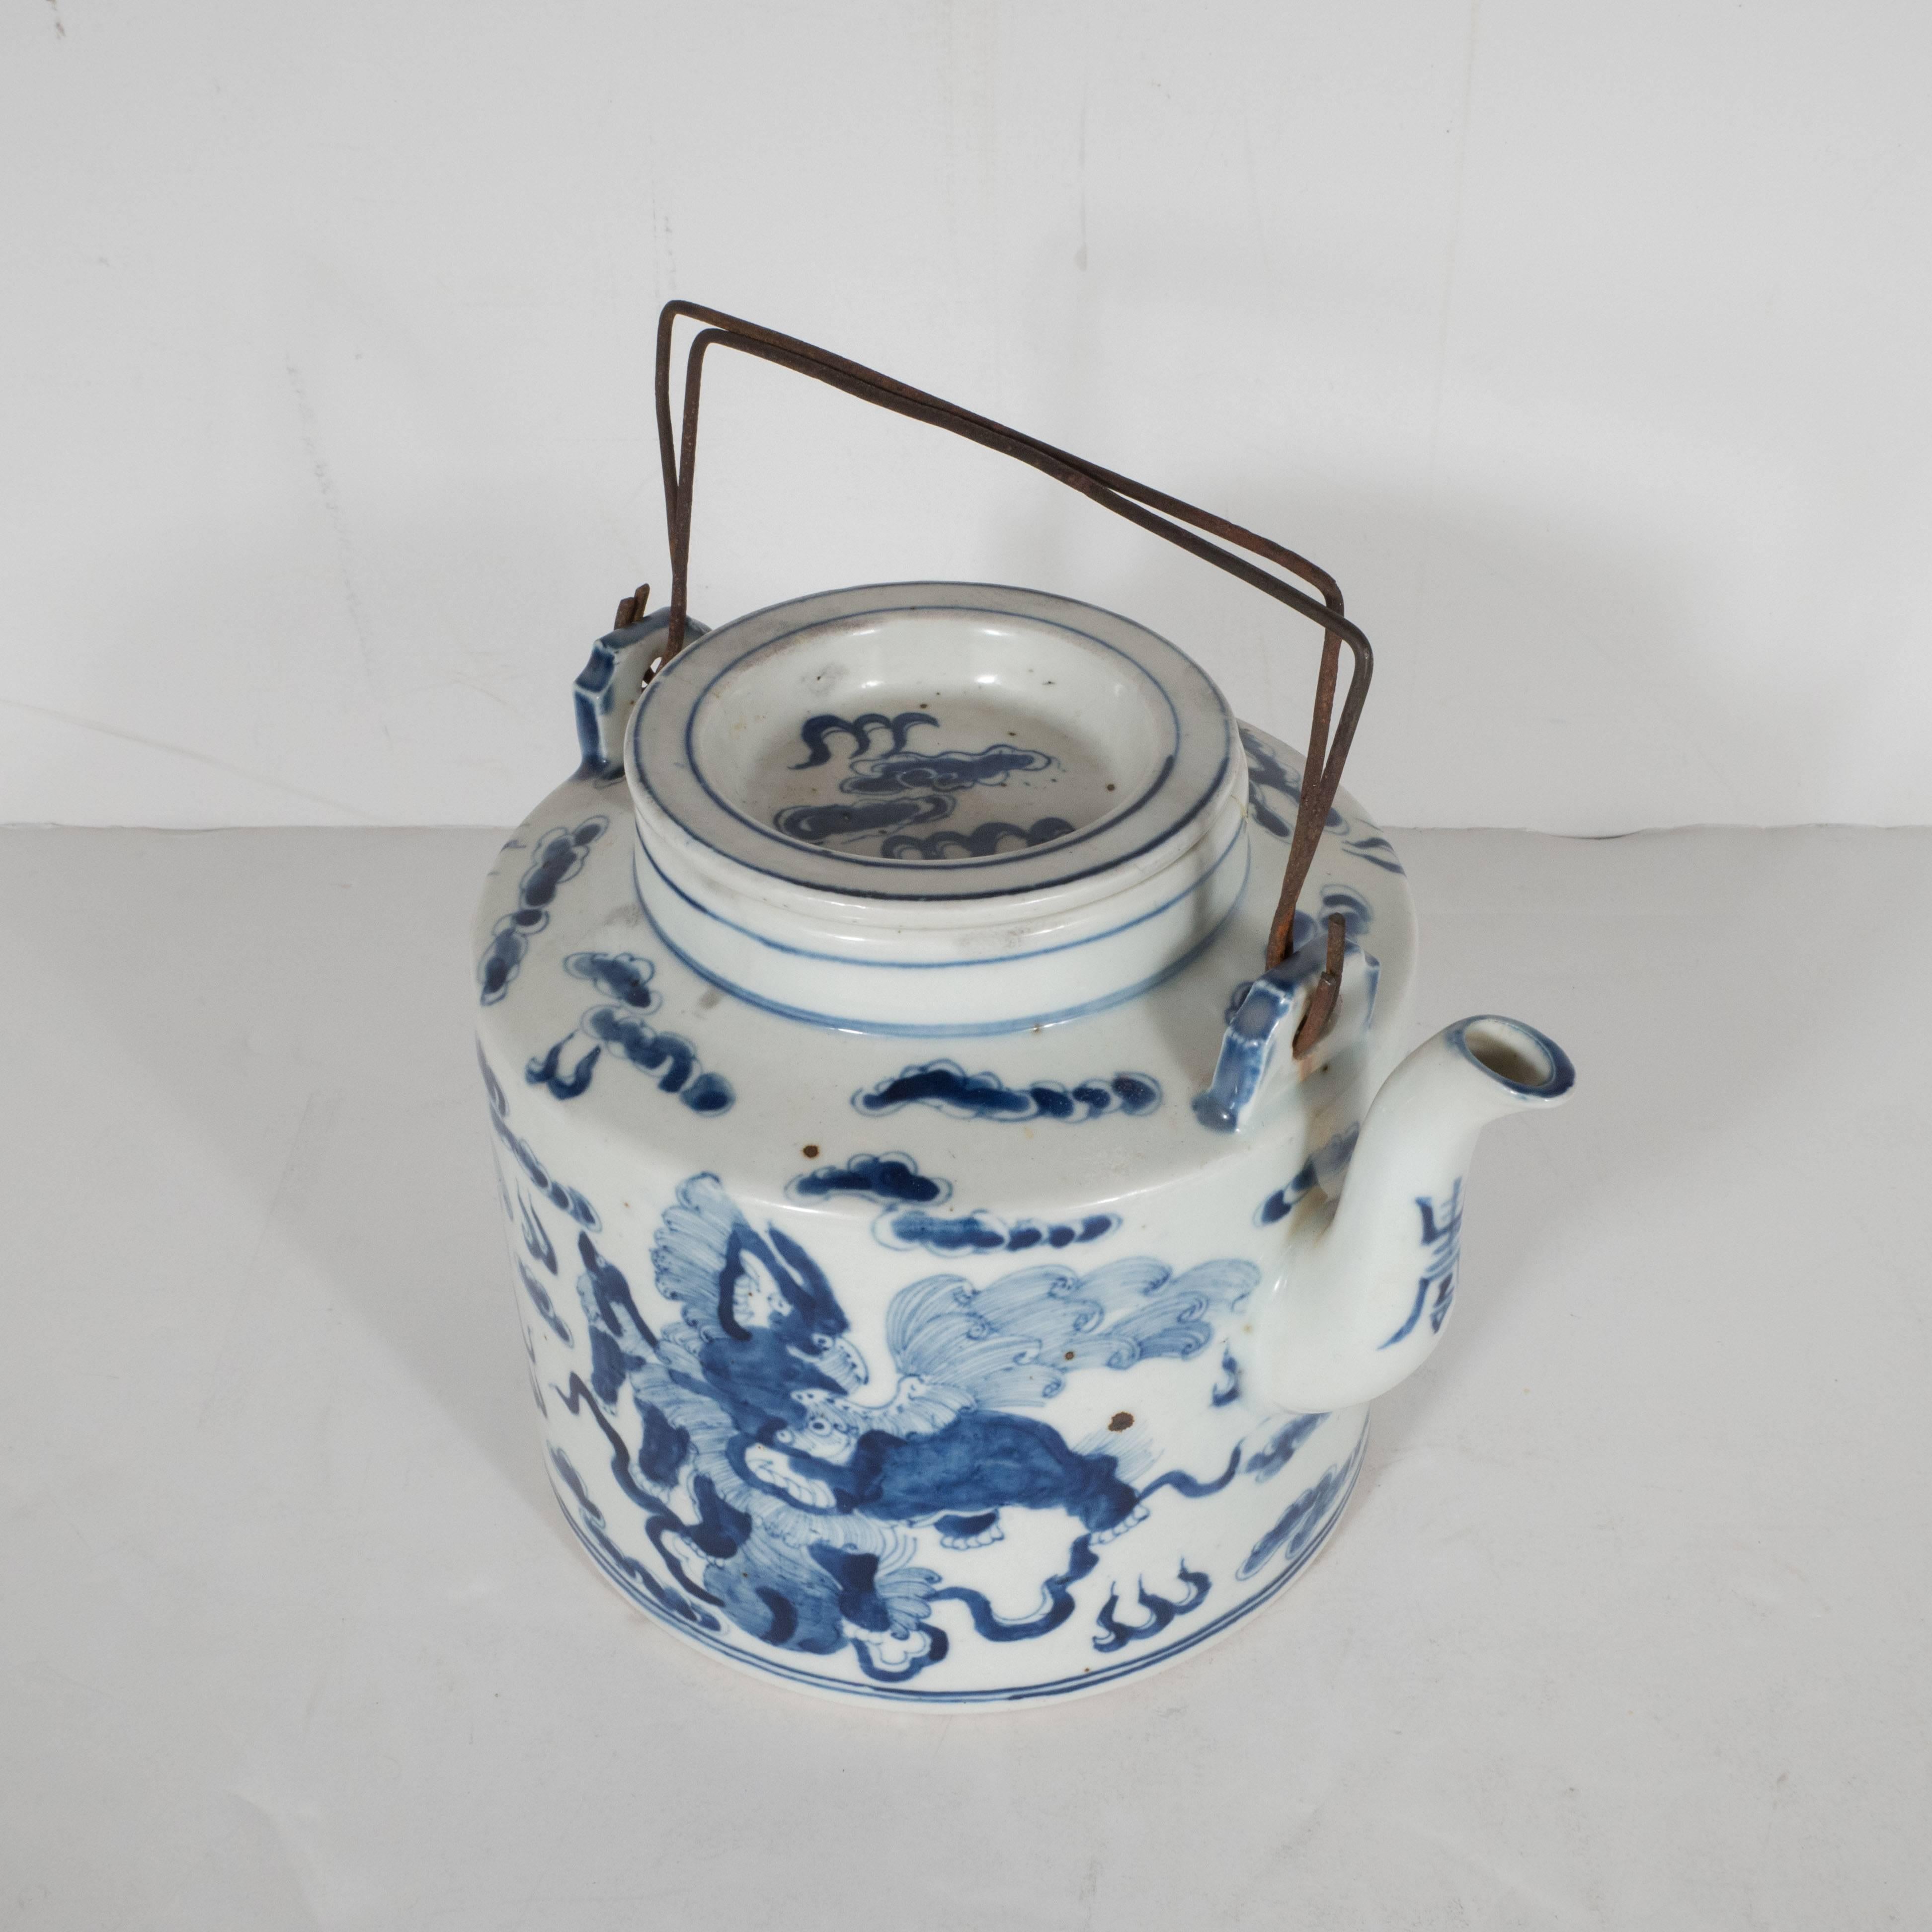 Chinese Export Exquisite Chinese Delft Tea Pot 19th Century with Temple Guardian Lions Motif